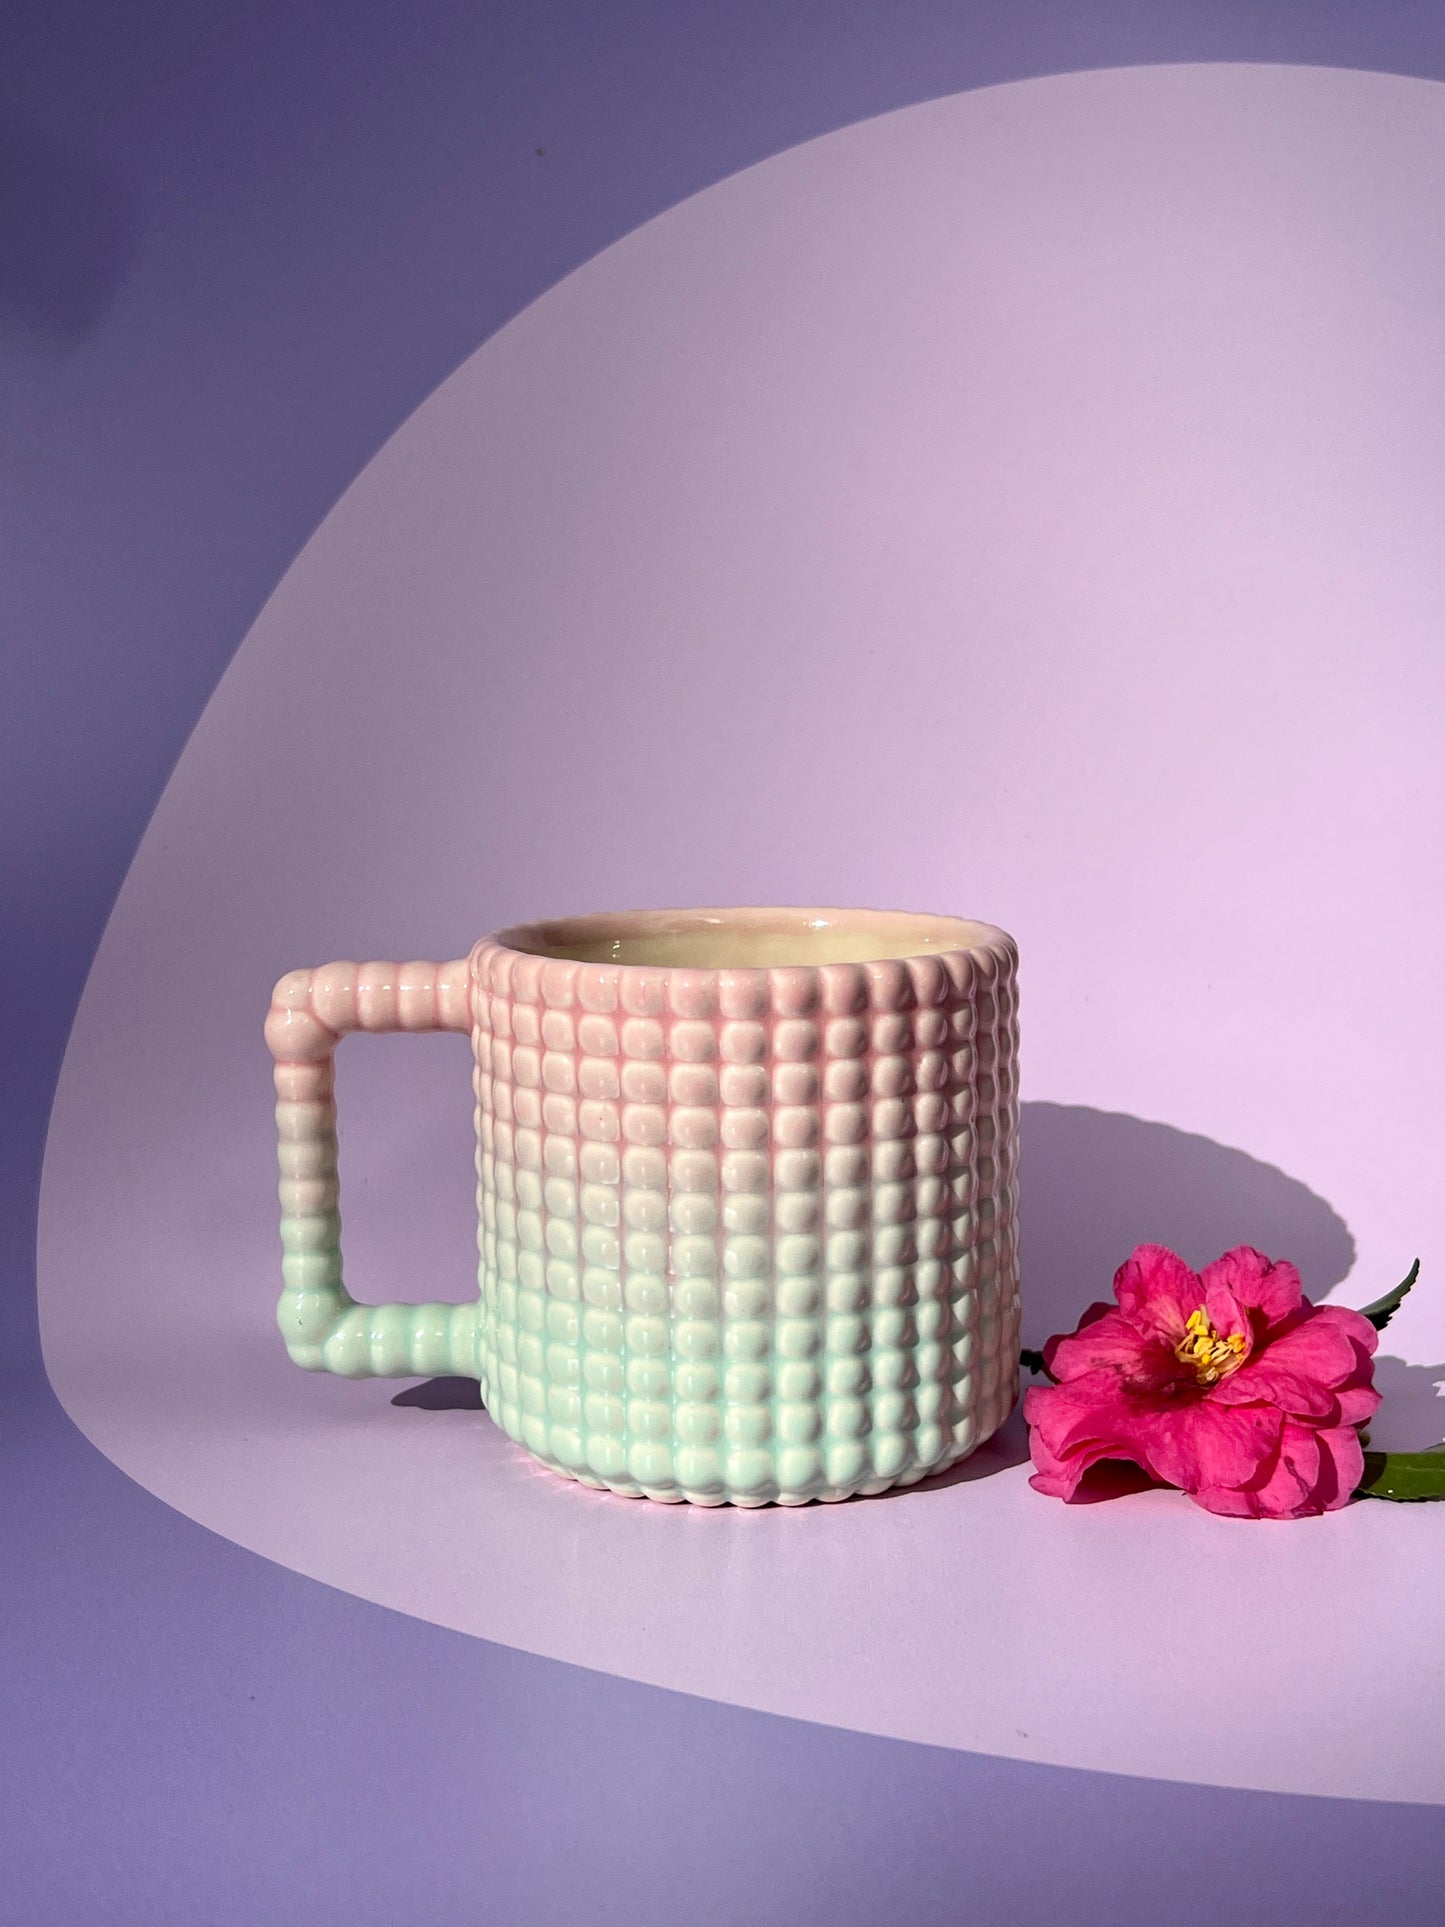 Gozarian Mug with Big Dimple Texture in Birthday Fade